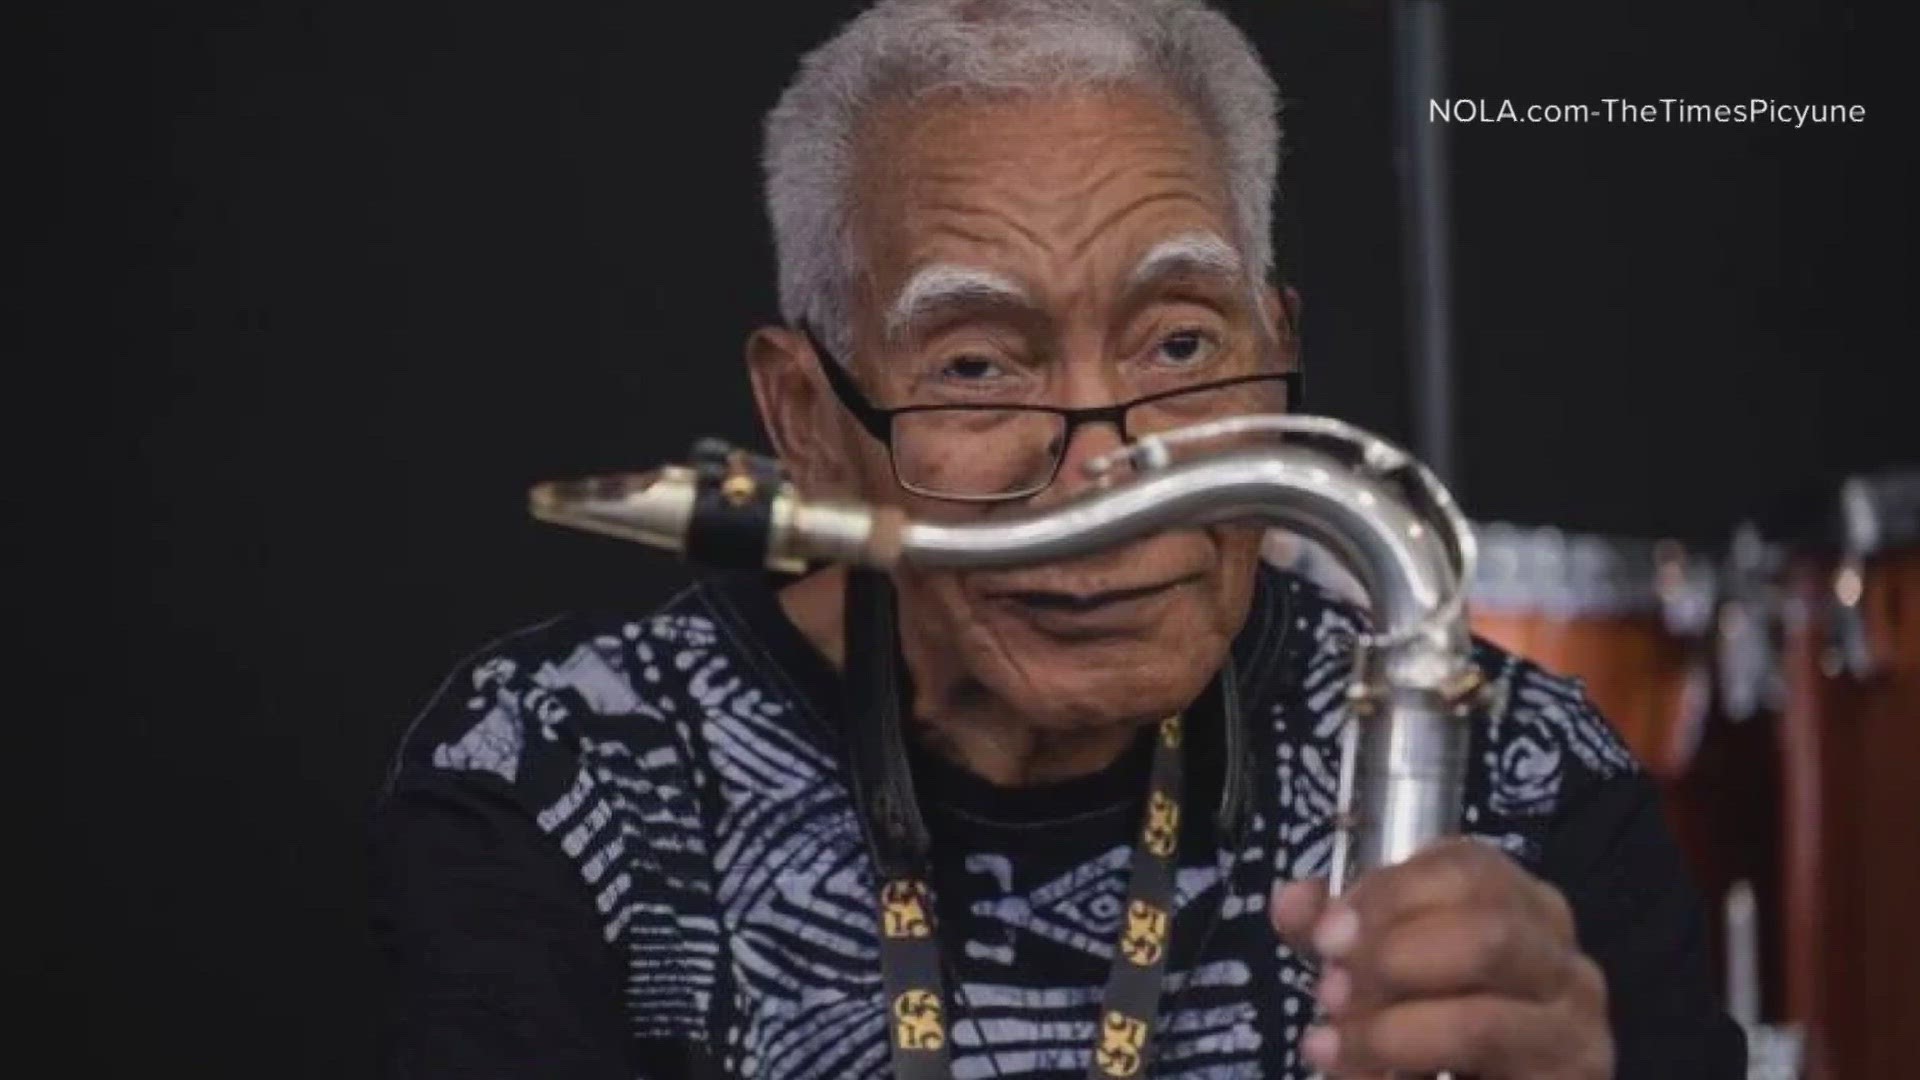 He taught many, accompanied some of music's best and made his own music - Kidd Jordan was remembered fondly Friday.